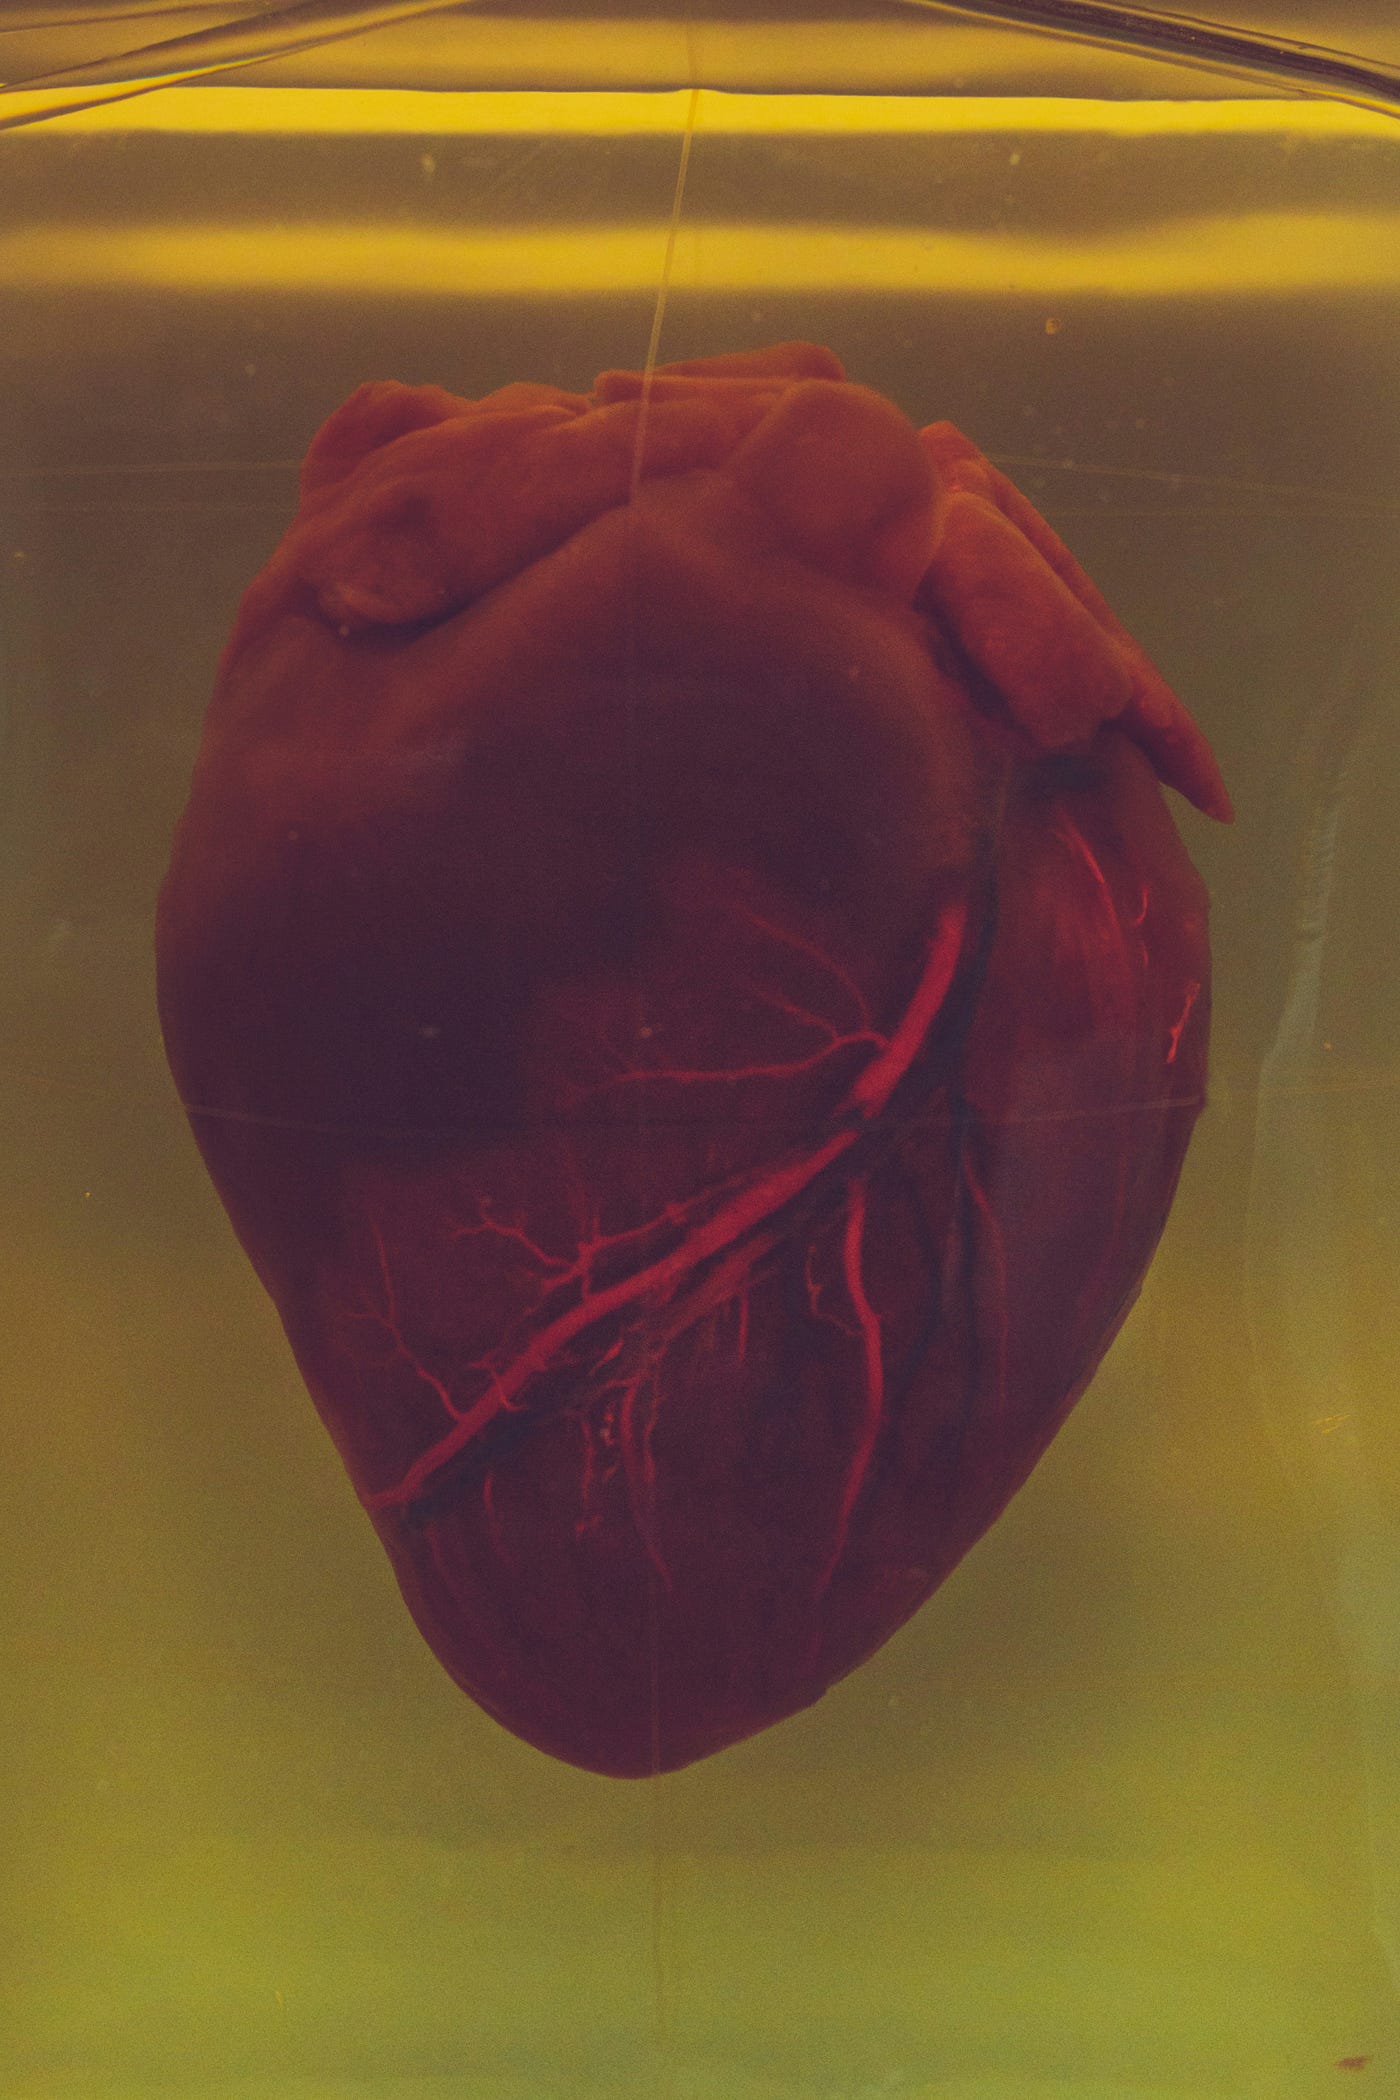 An anatomic representation of a human heart. The Atlantic diet is heart-healthy.